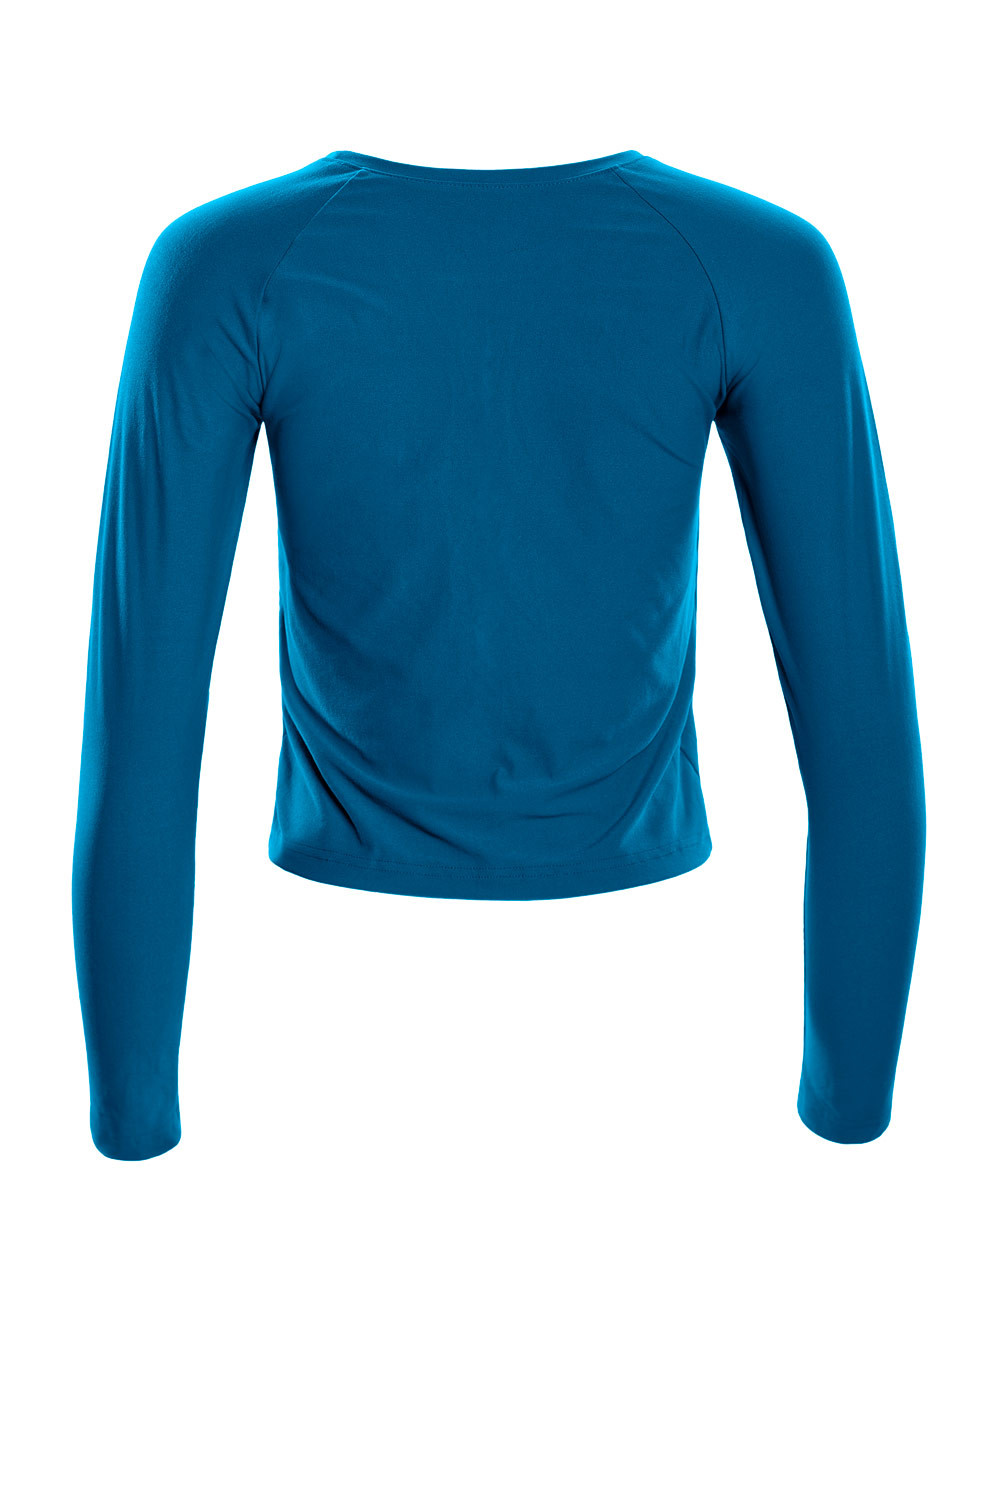 Top Functional Winshape Cropped Sleeve Long green, Ultra Soft AET119LS, Light Style and Soft teal